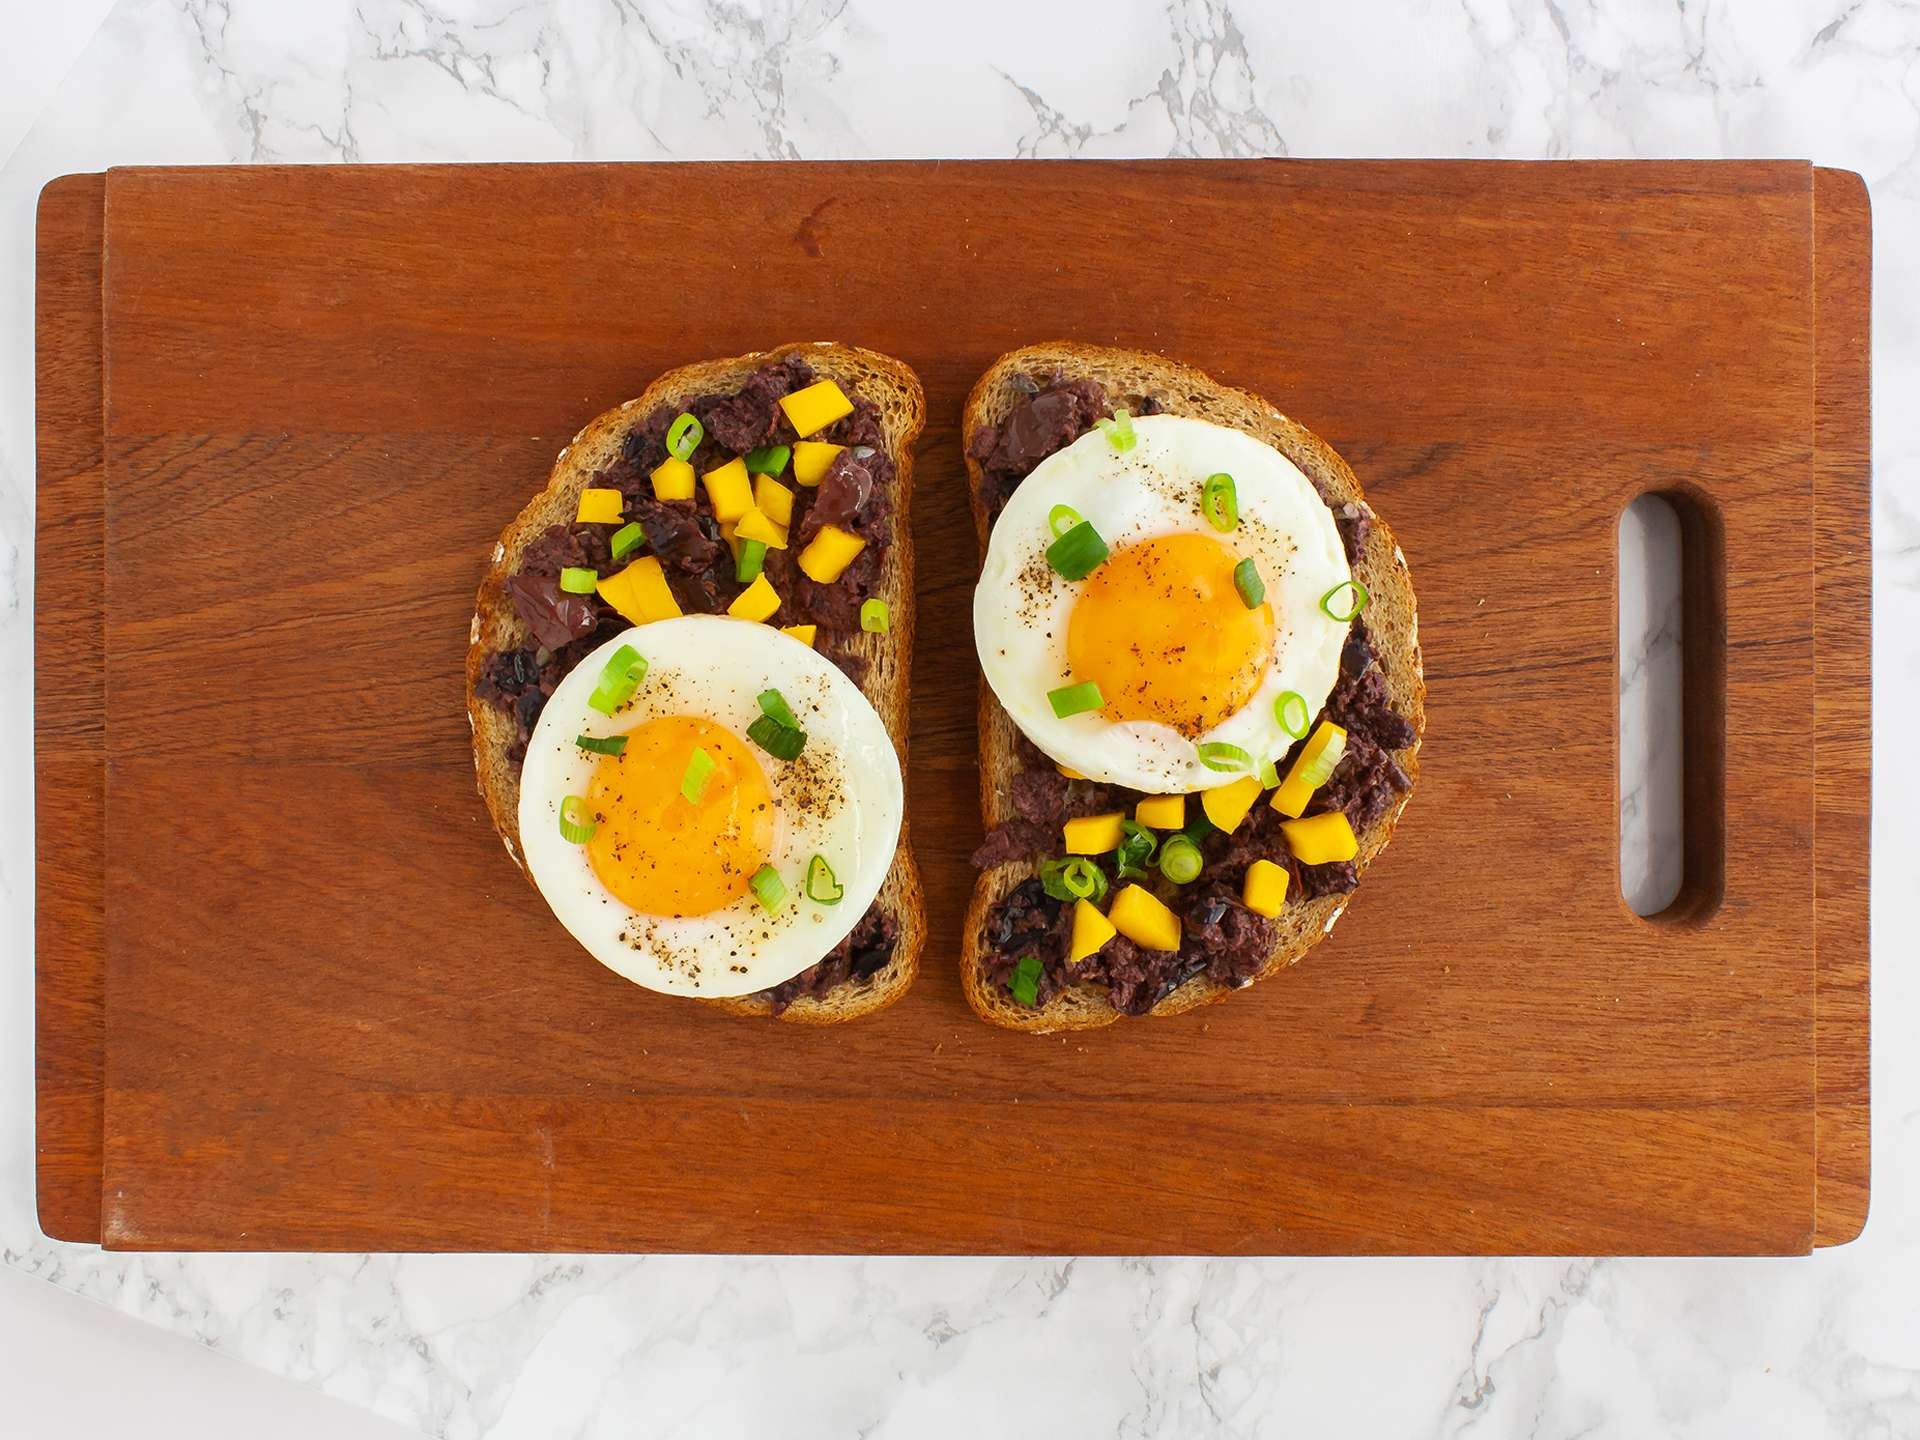 Step 3.2 of Olive Tapenade Bruschetta With Mango and Eggs